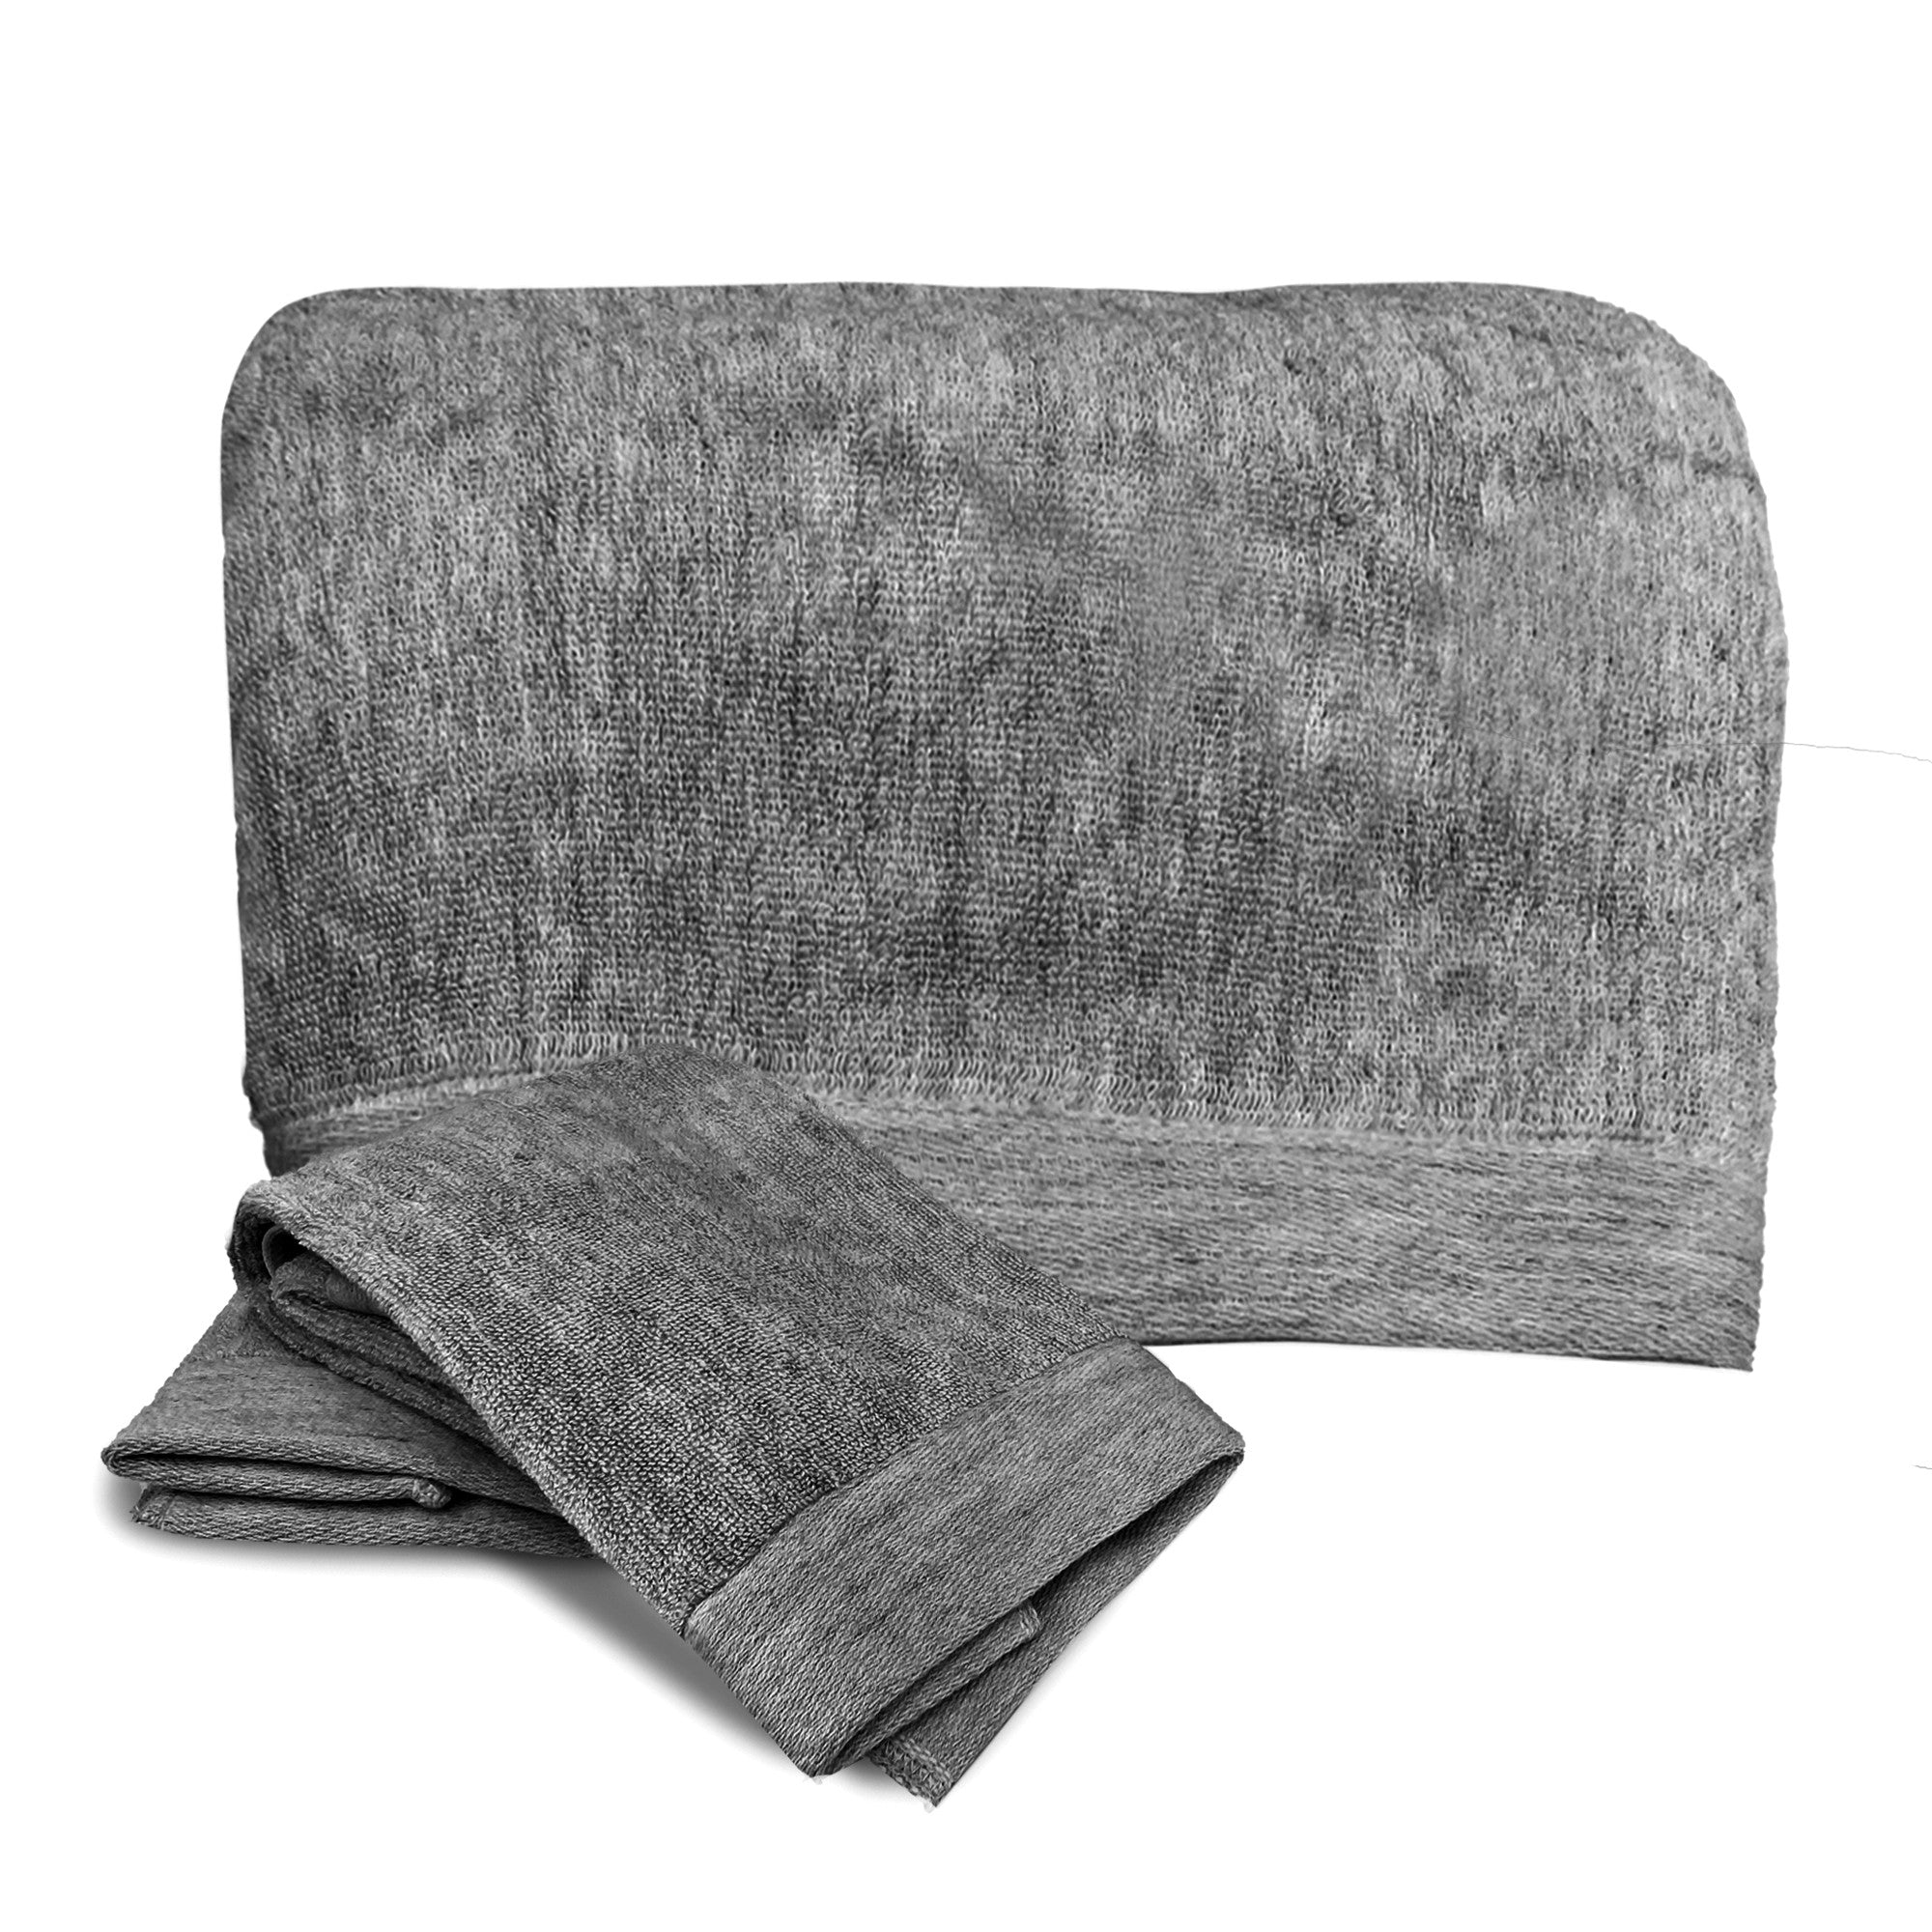 MELANGE Bamboo 3Pcs Set - Soft, Super Absorbent, Hypoallergenic and Gentle to Skin and Hair Bath Towel Sets - Charcoal